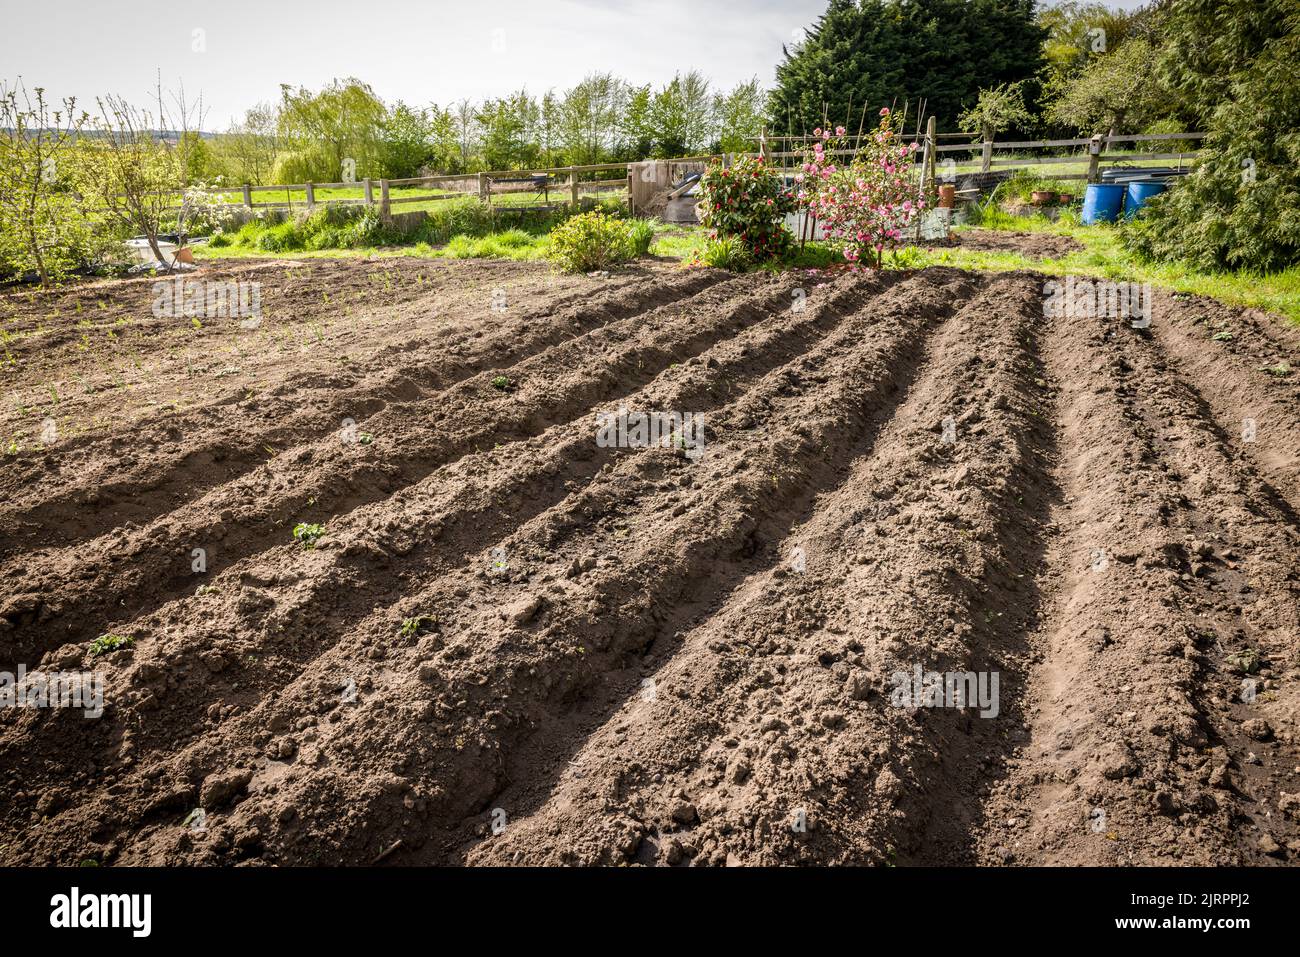 Digging allotments in winter. Preparing empty beds in an allotment garden, UK Stock Photo